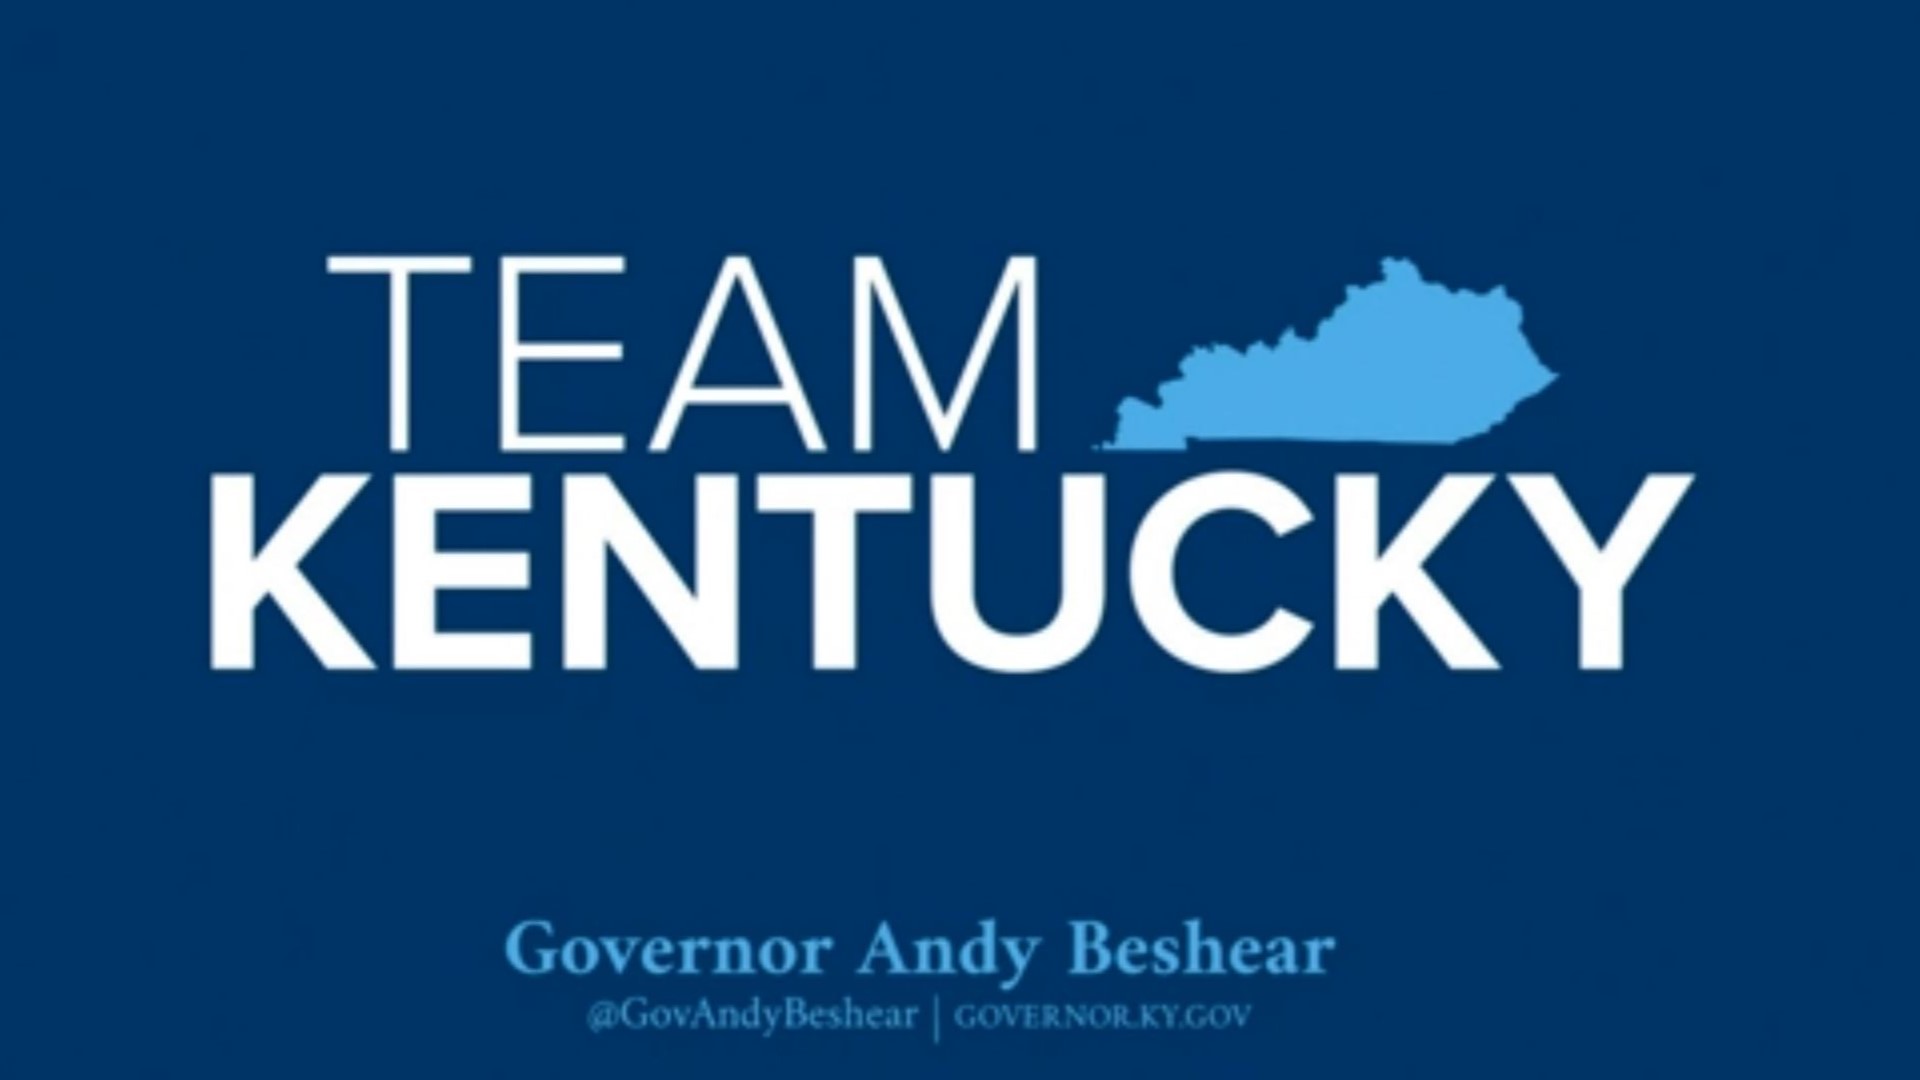 Kentucky has almost 30 cases of COVID-19, according to Beshear. He's asking hair salons, nail salons, spas, gyms and more to close by 5pm Wednesday, March 18.